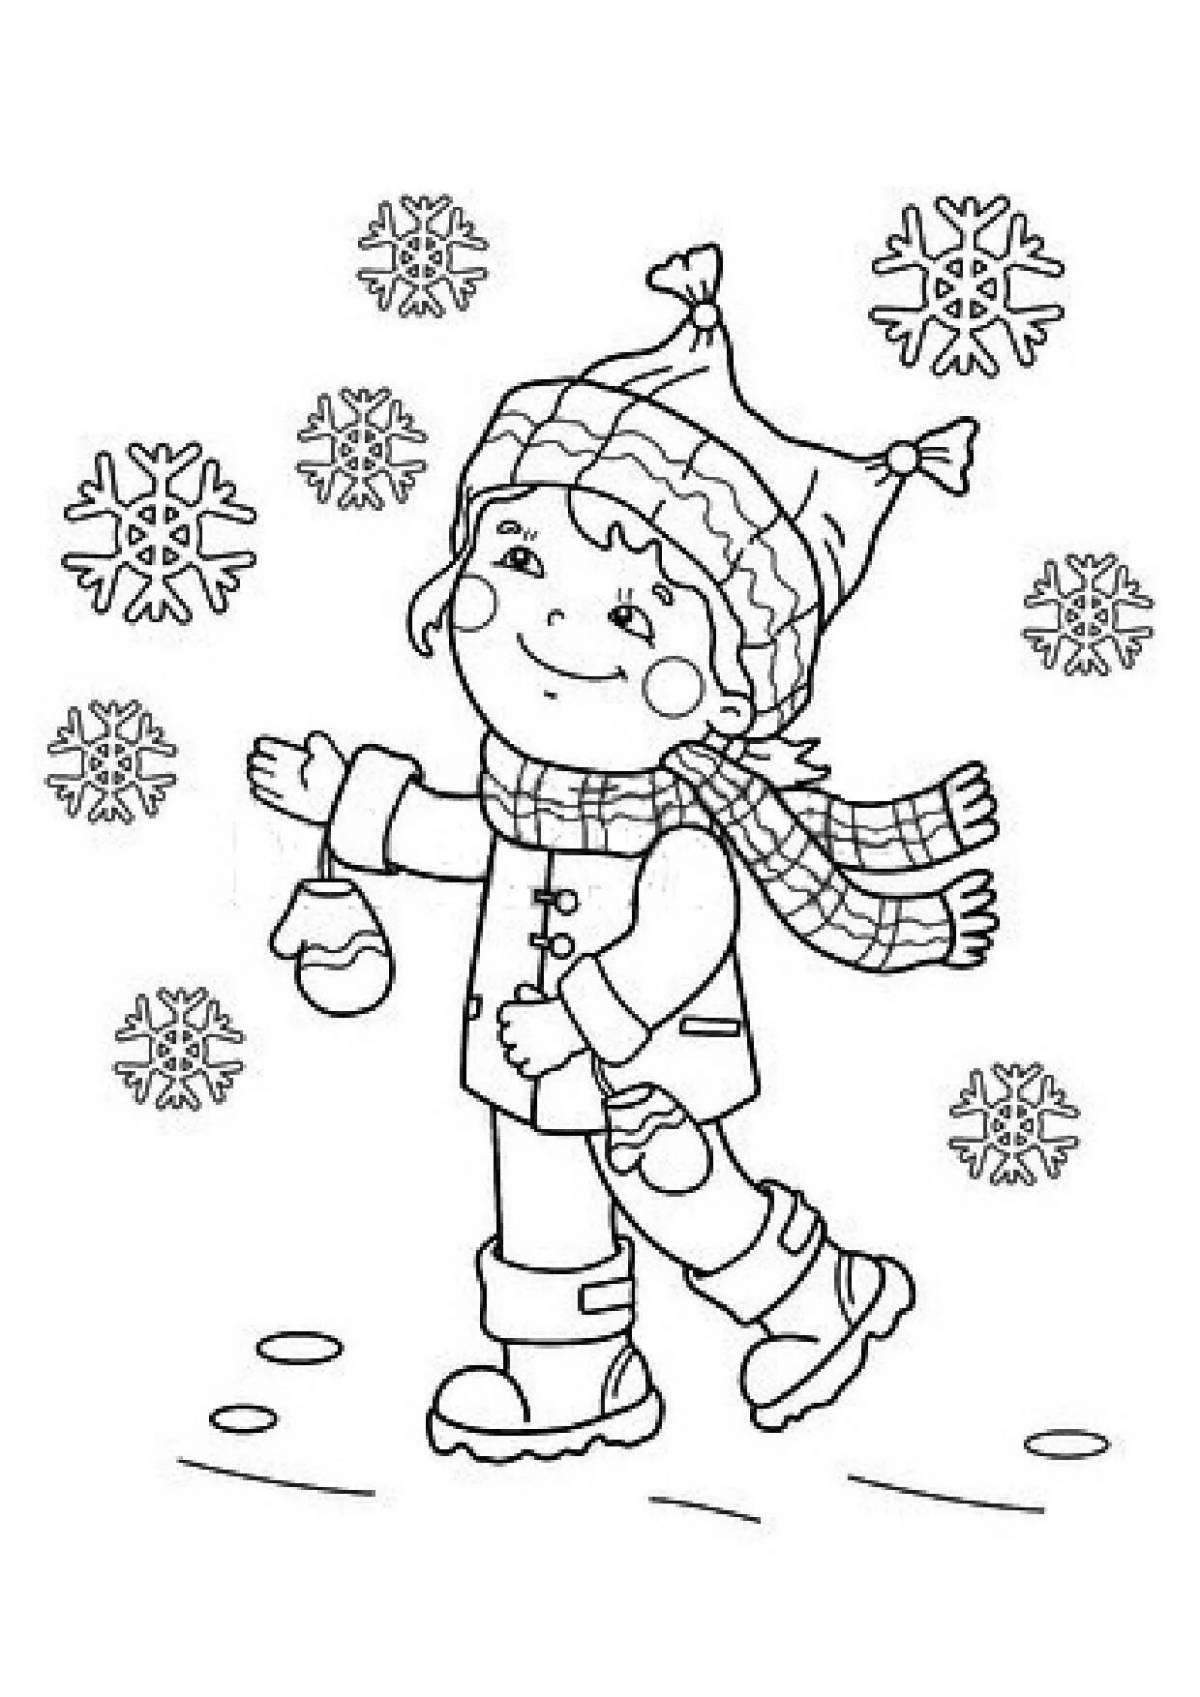 Calming snow coloring page